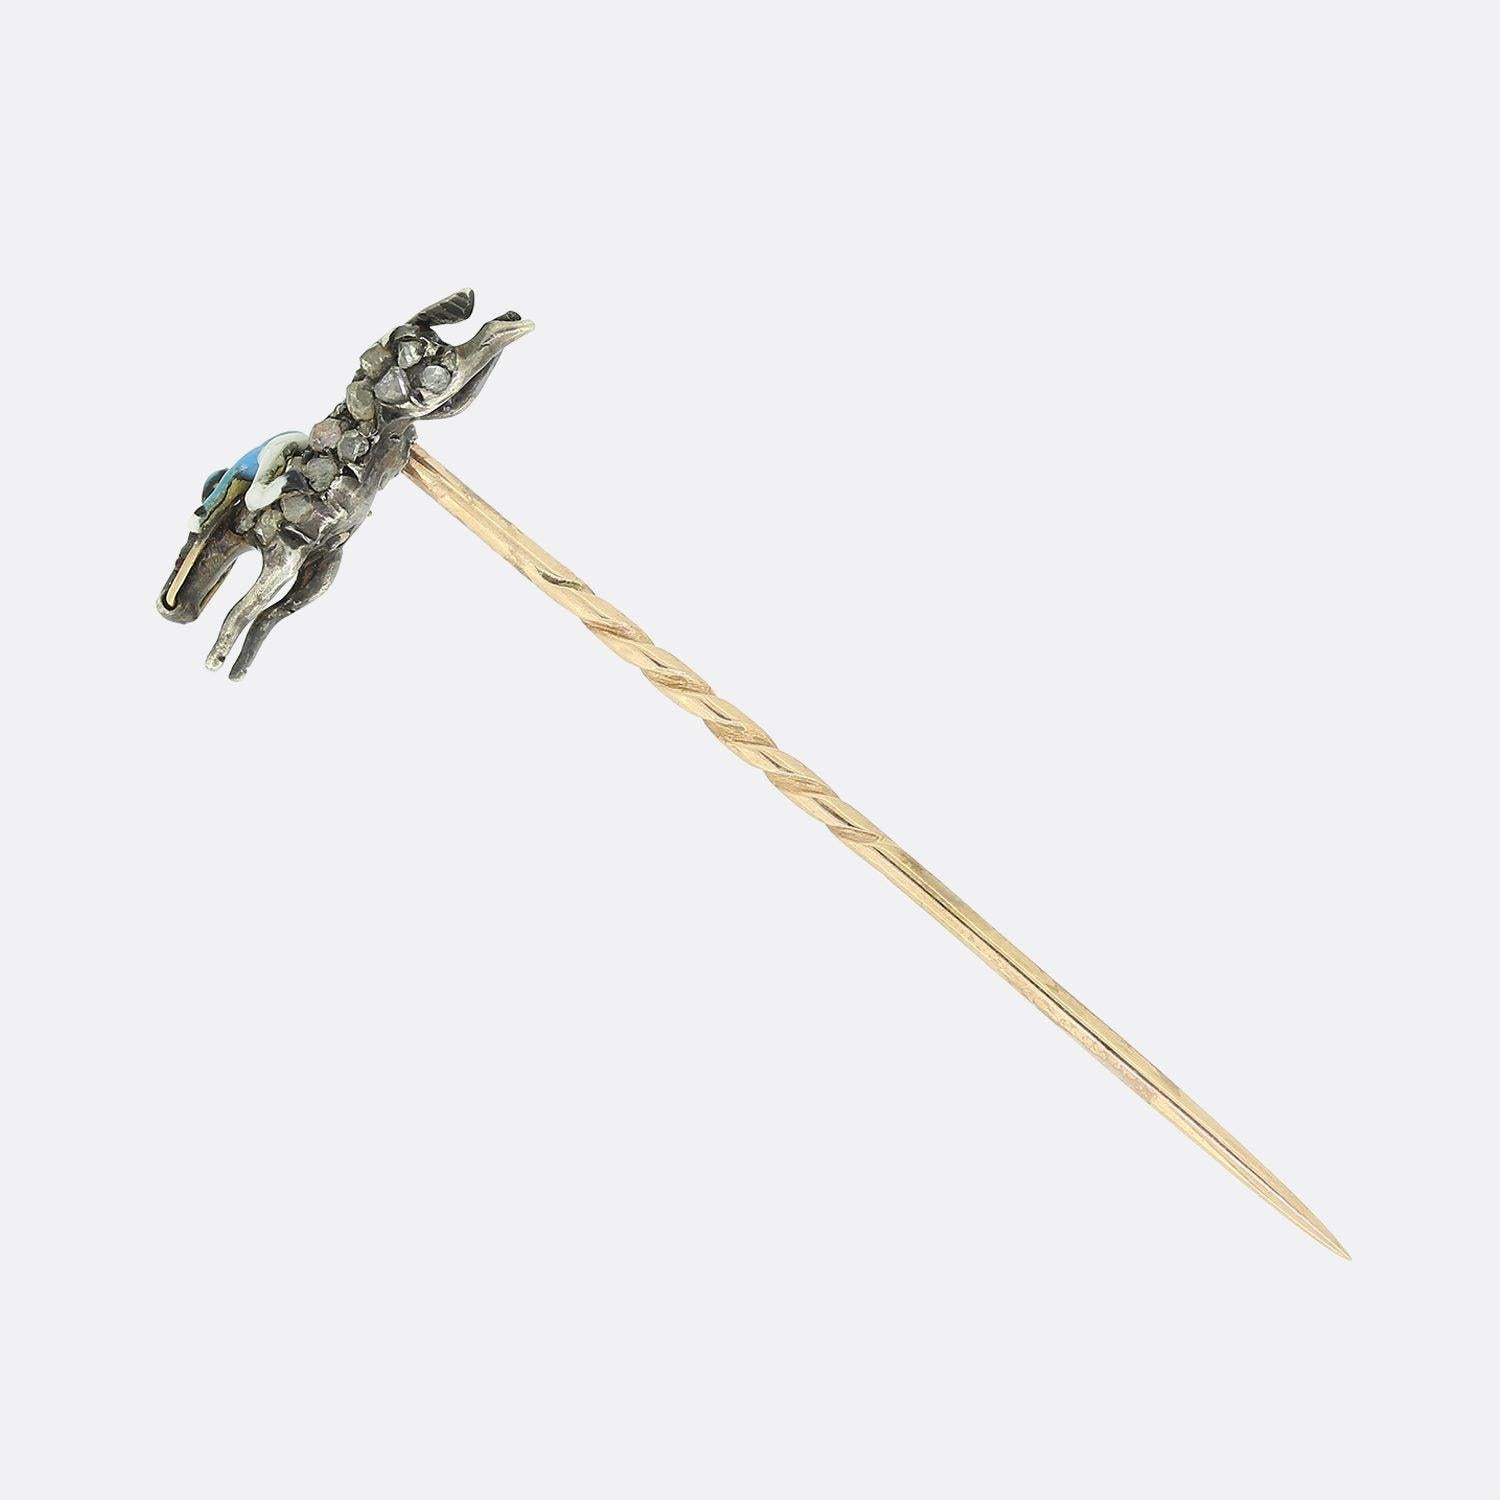 This is a Victorian 9ct yellow gold and silver stick pin. The head of the pin features an enamel jockey riding a horse which has been set with rose cut diamonds with ruby eyes. The diamonds have been set in silver and backed in gold. 

Condition: